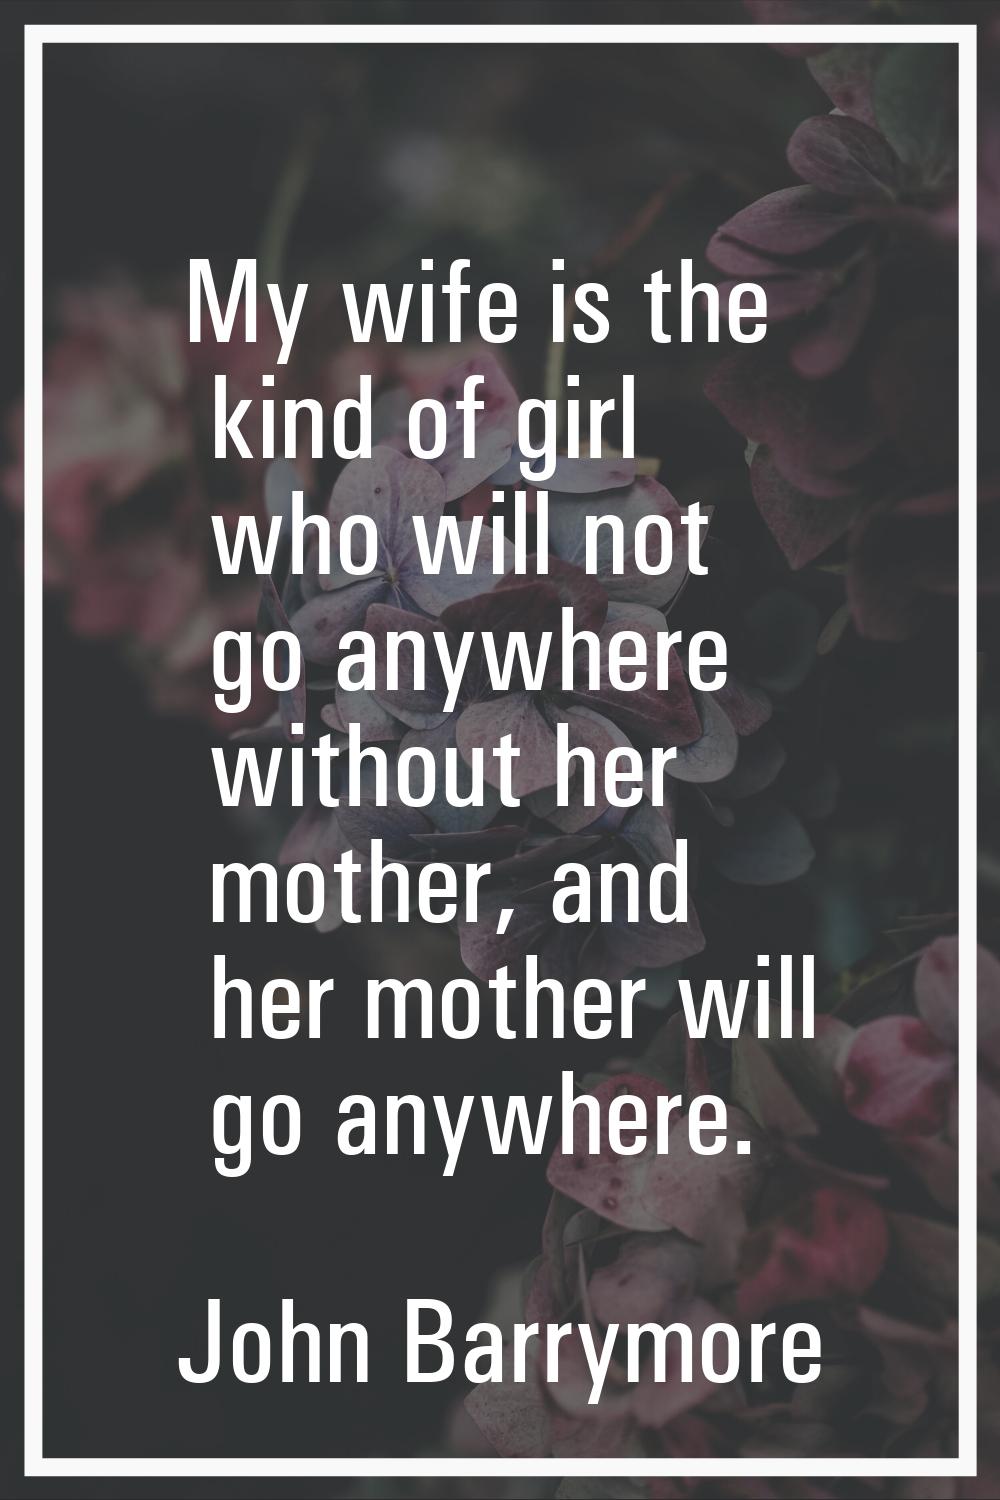 My wife is the kind of girl who will not go anywhere without her mother, and her mother will go any